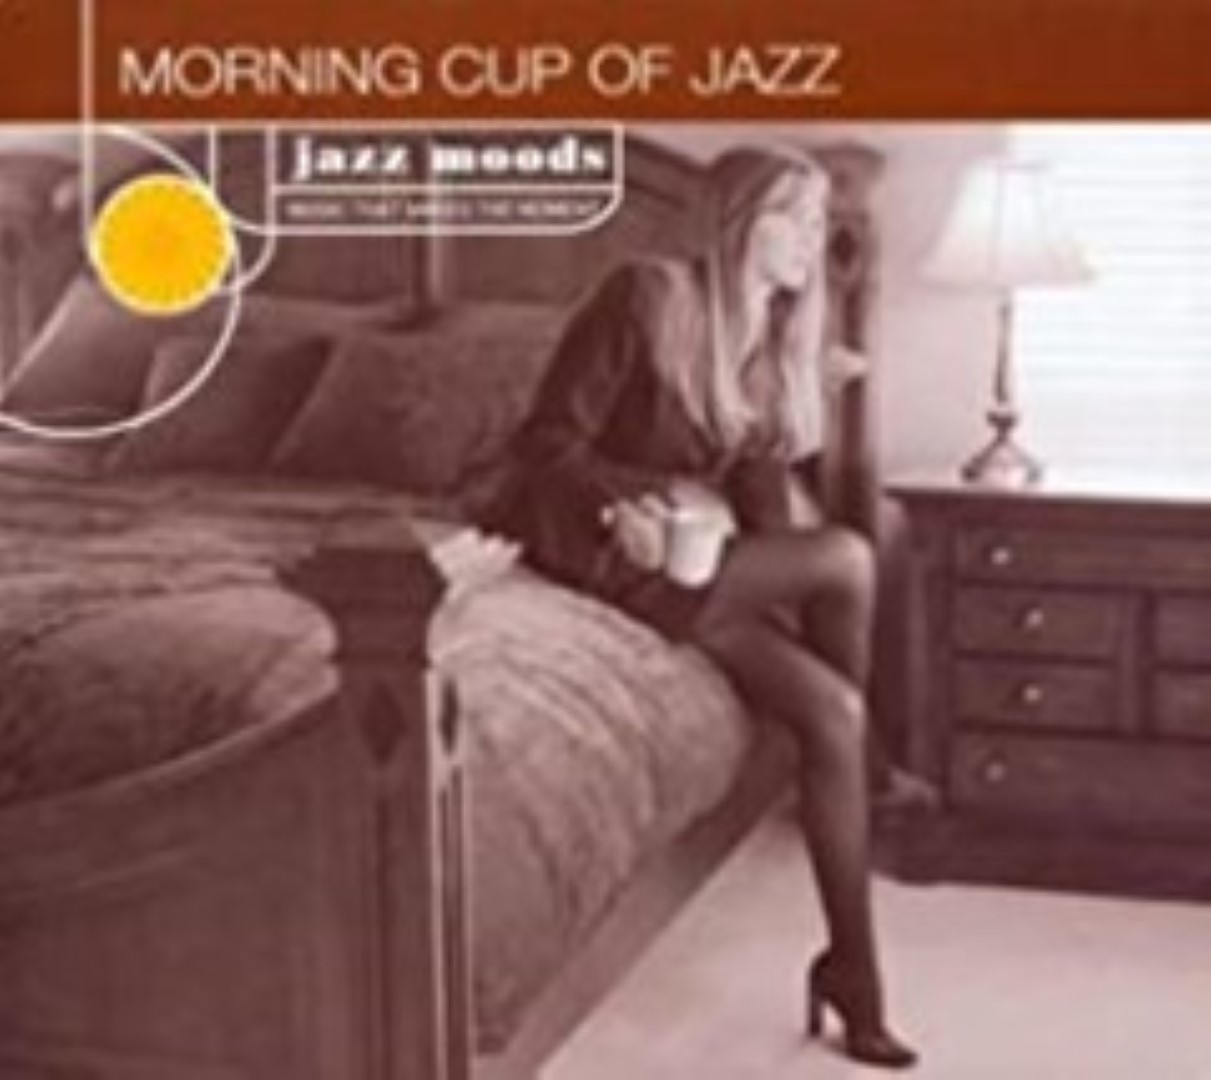 Jazz moods morning cup of jazz cd  large 